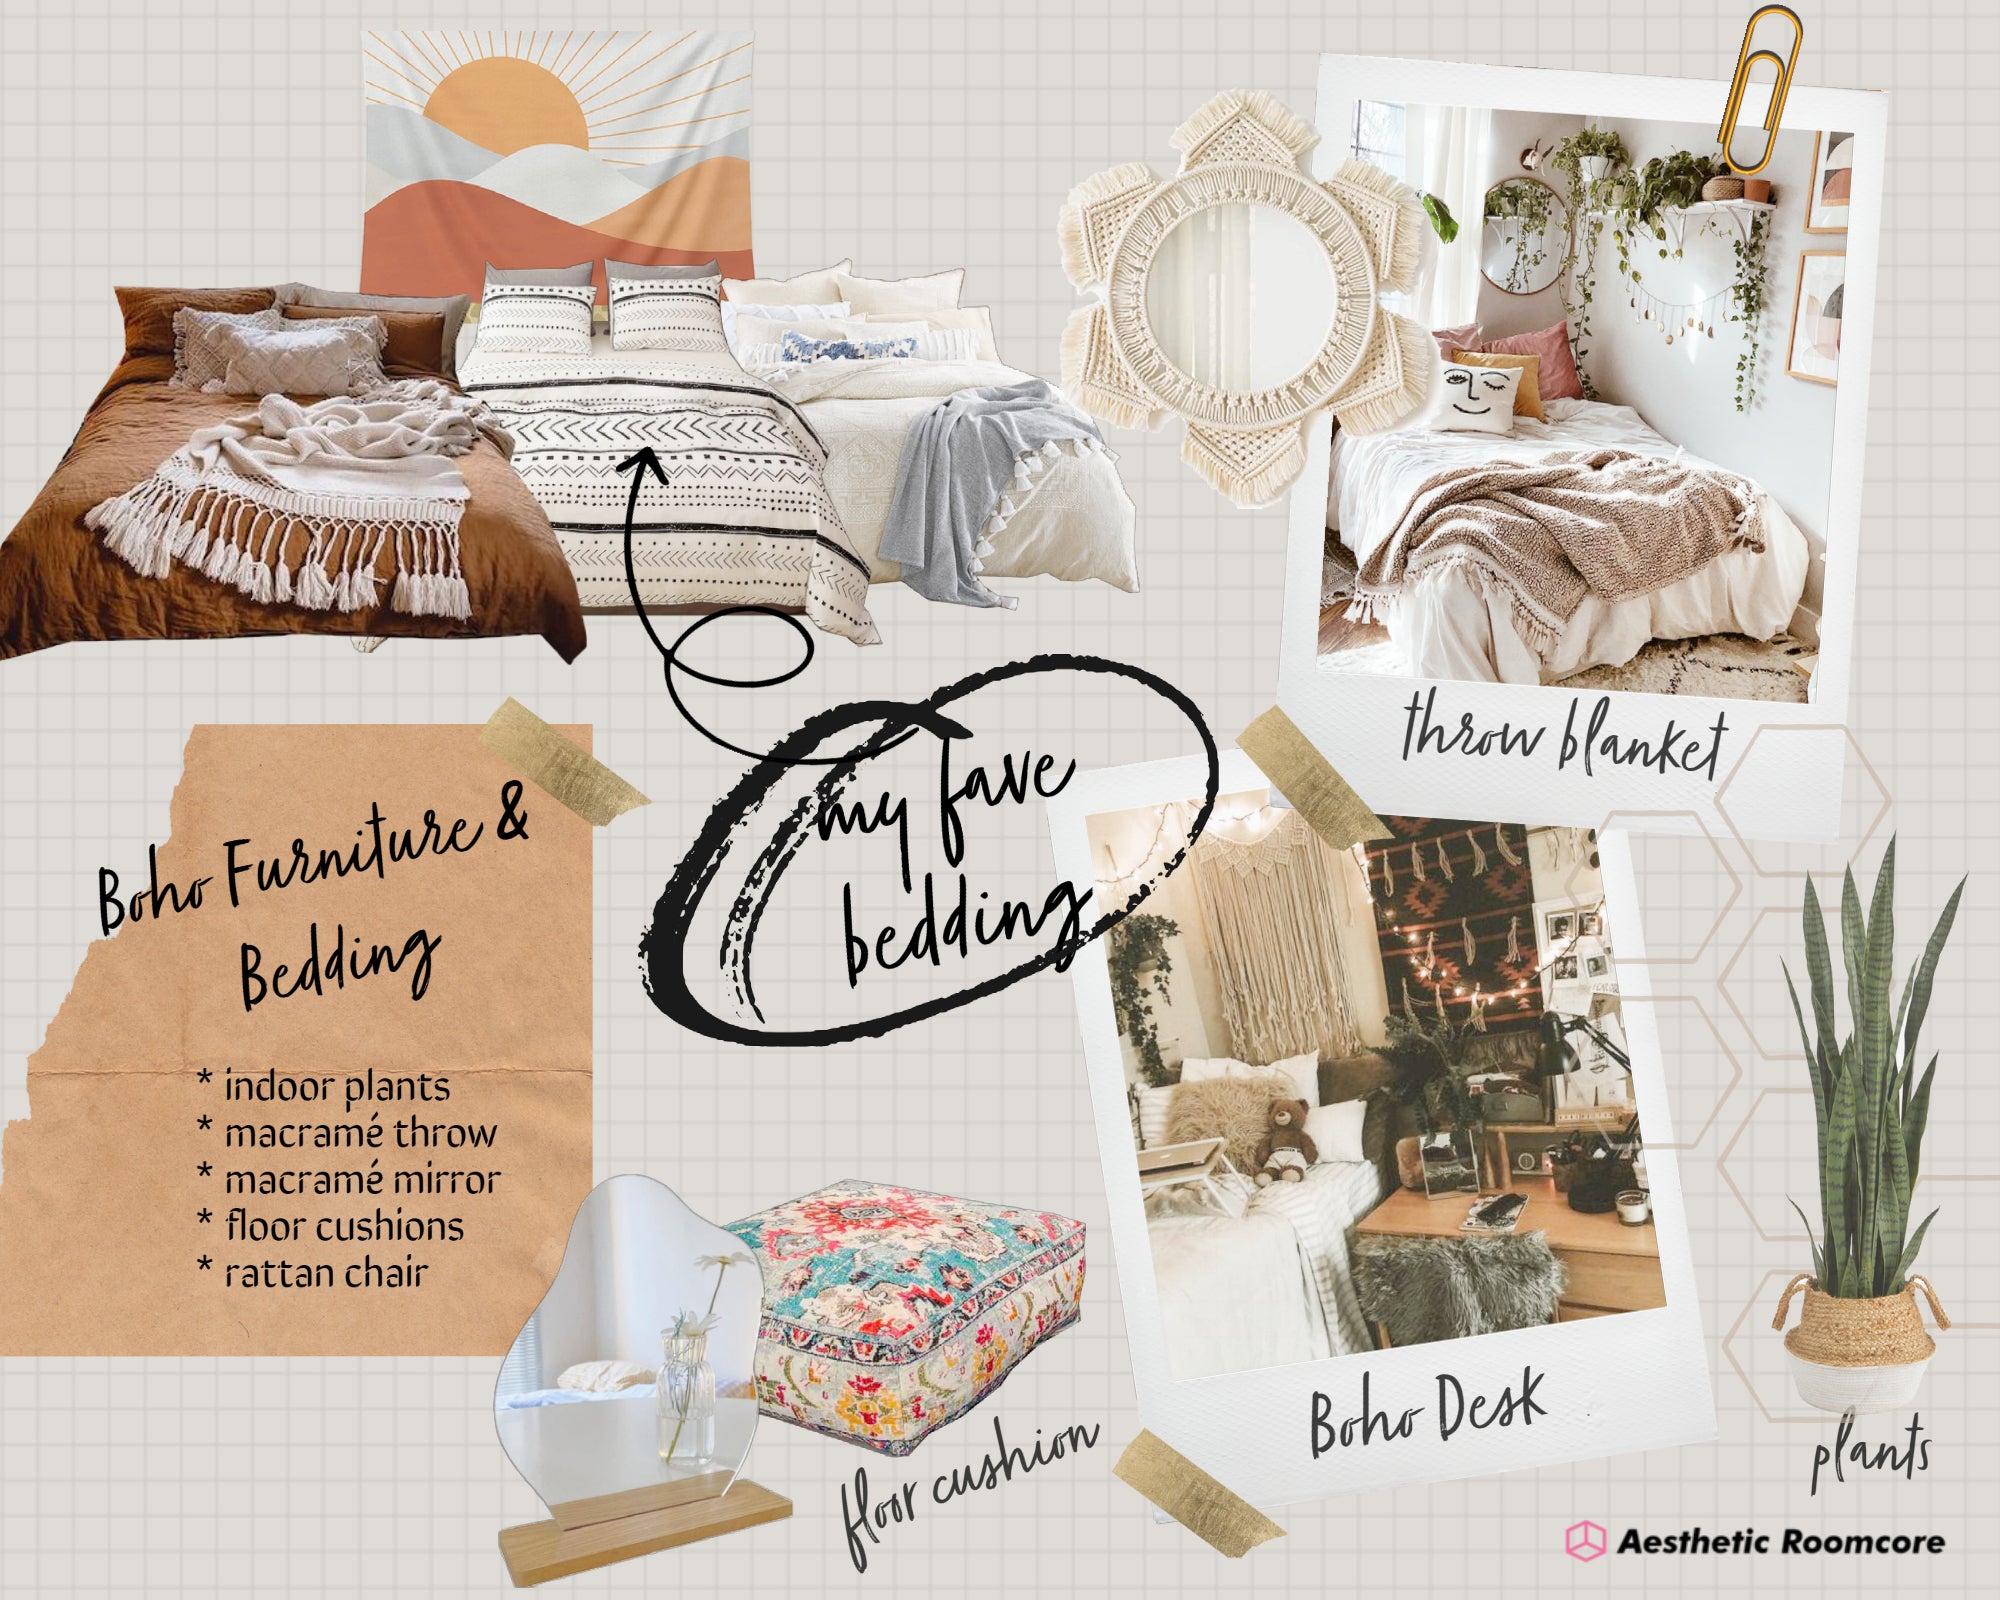 How to Create a Boho Aesthetic Room | Aesthetic Roomcore